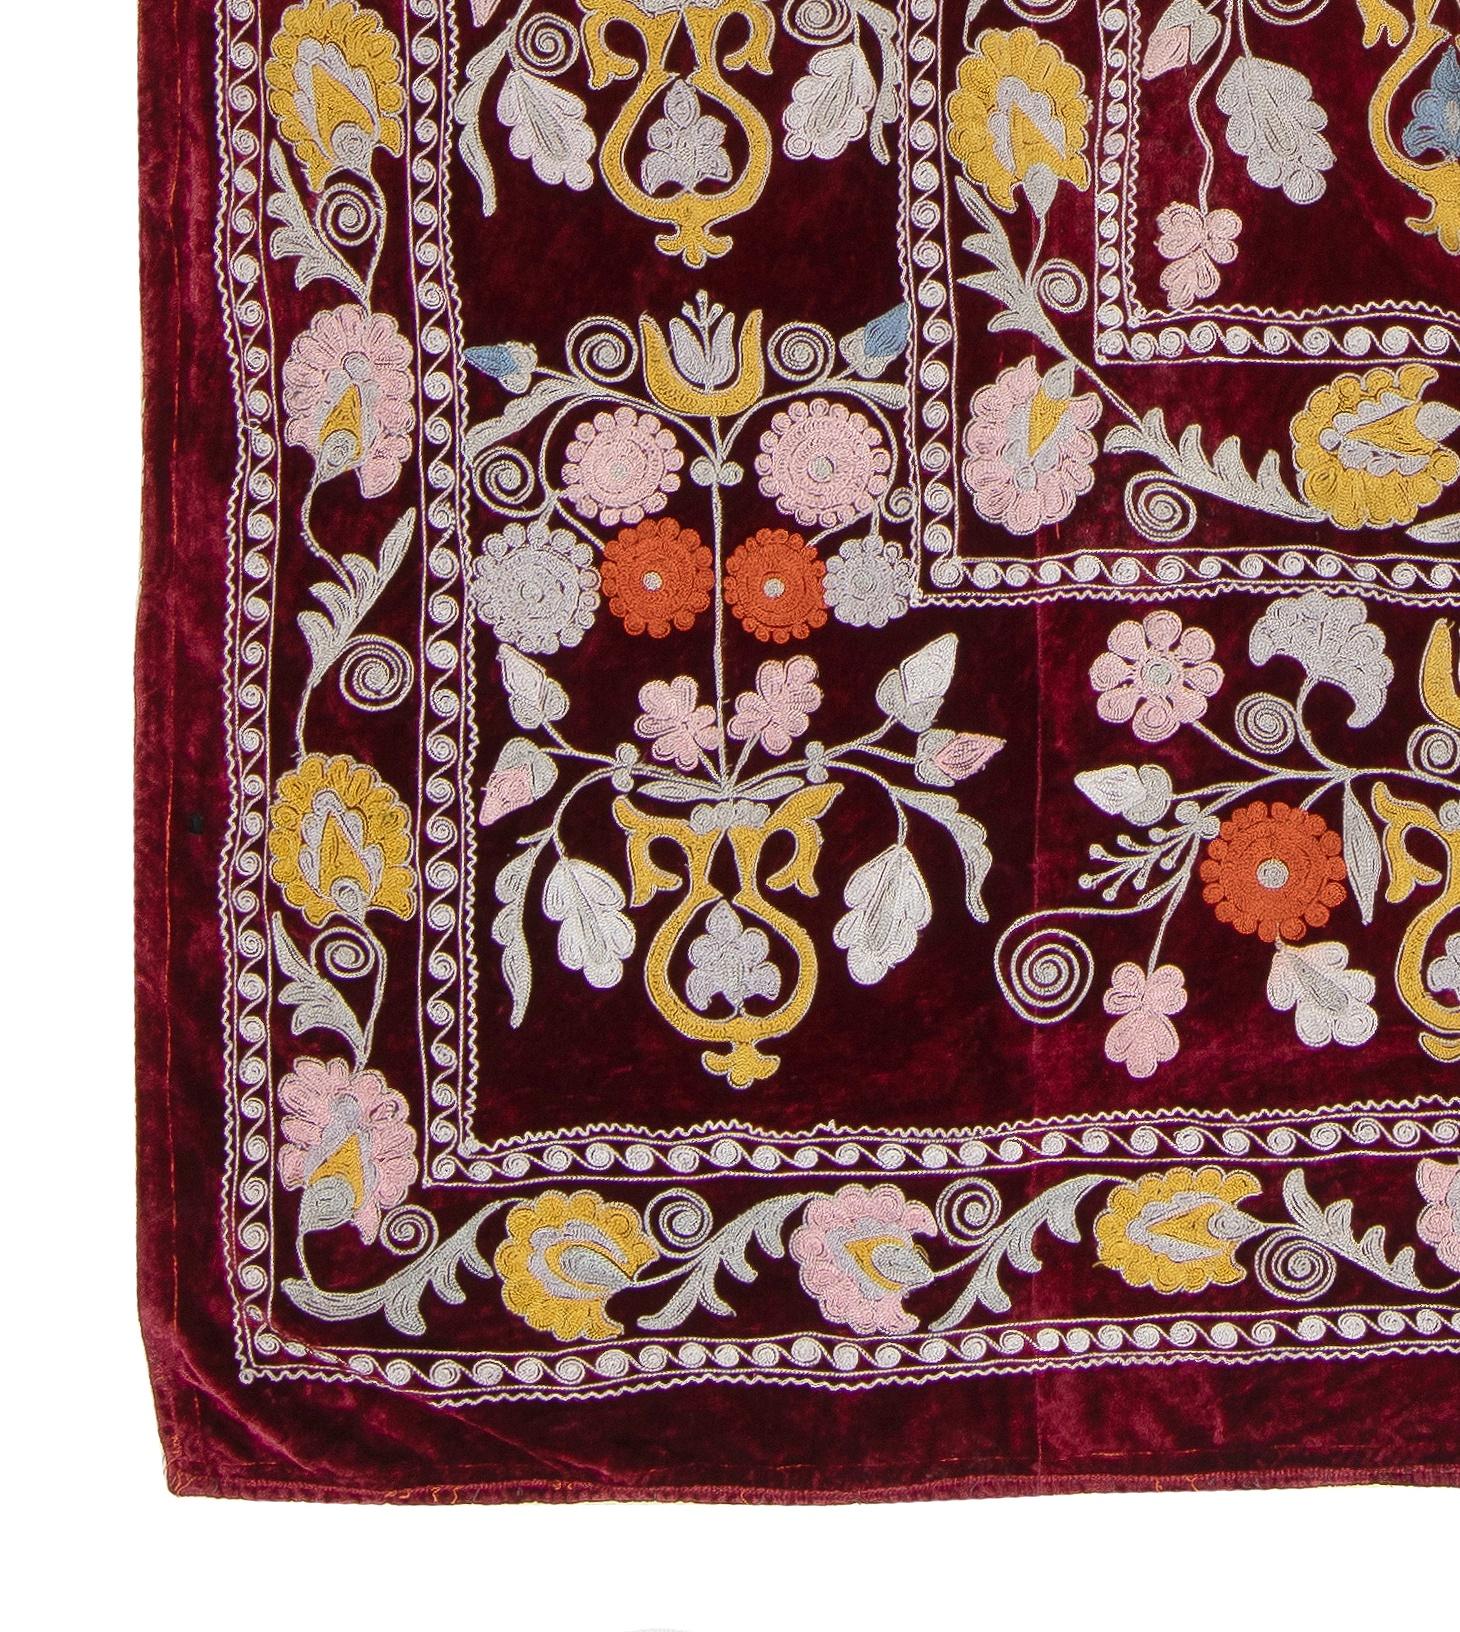 20th Century 4x7 Ft Vintage C. Asian Suzani Textile, Embroidered Wall Hanging or Bed Cover